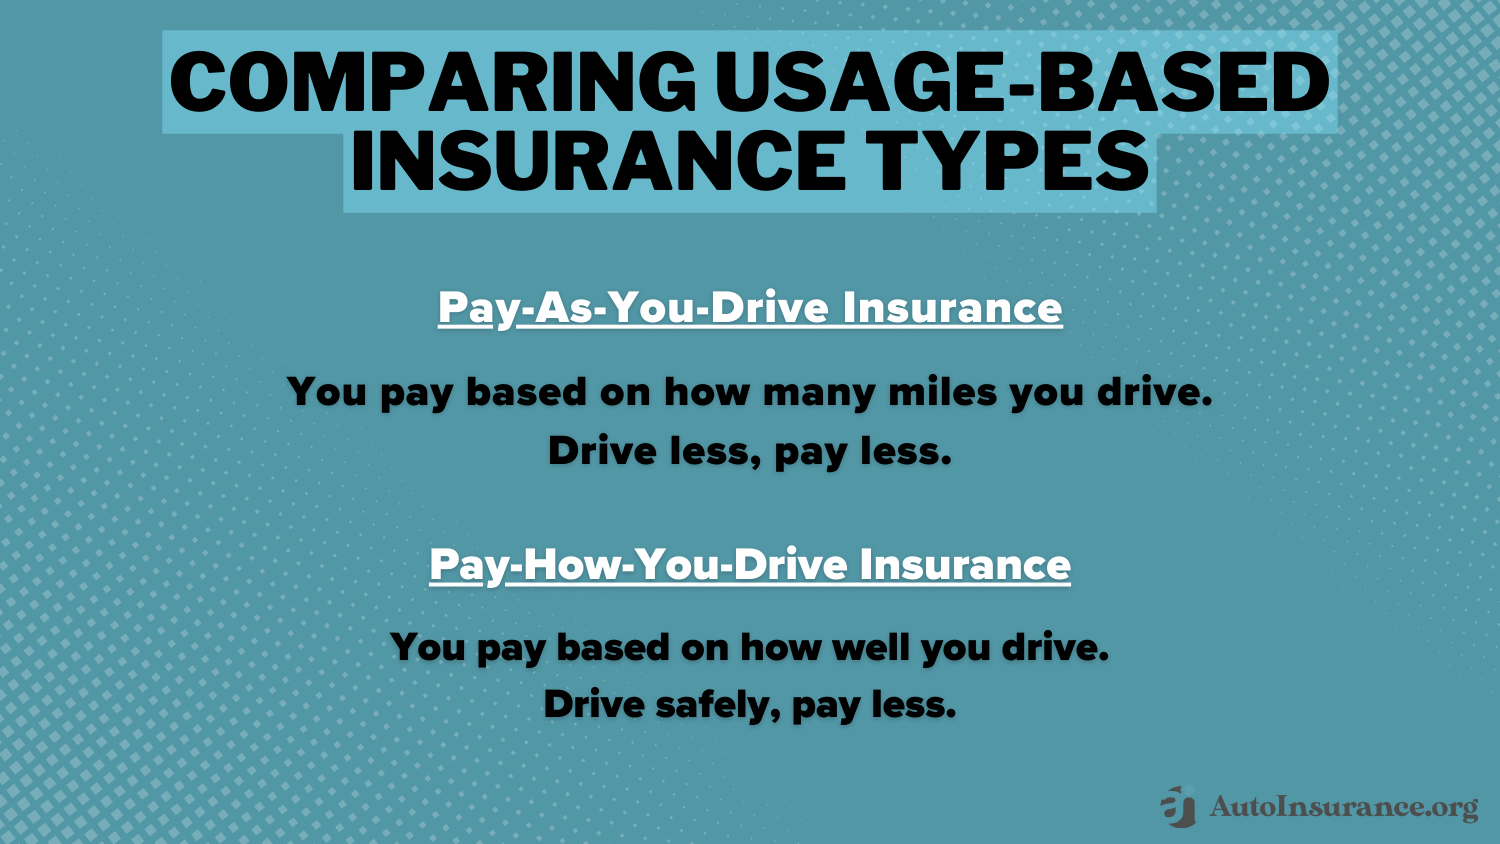 How to Lower Your Auto Insurance Rates: Comparing Usage-Based Insurance Types